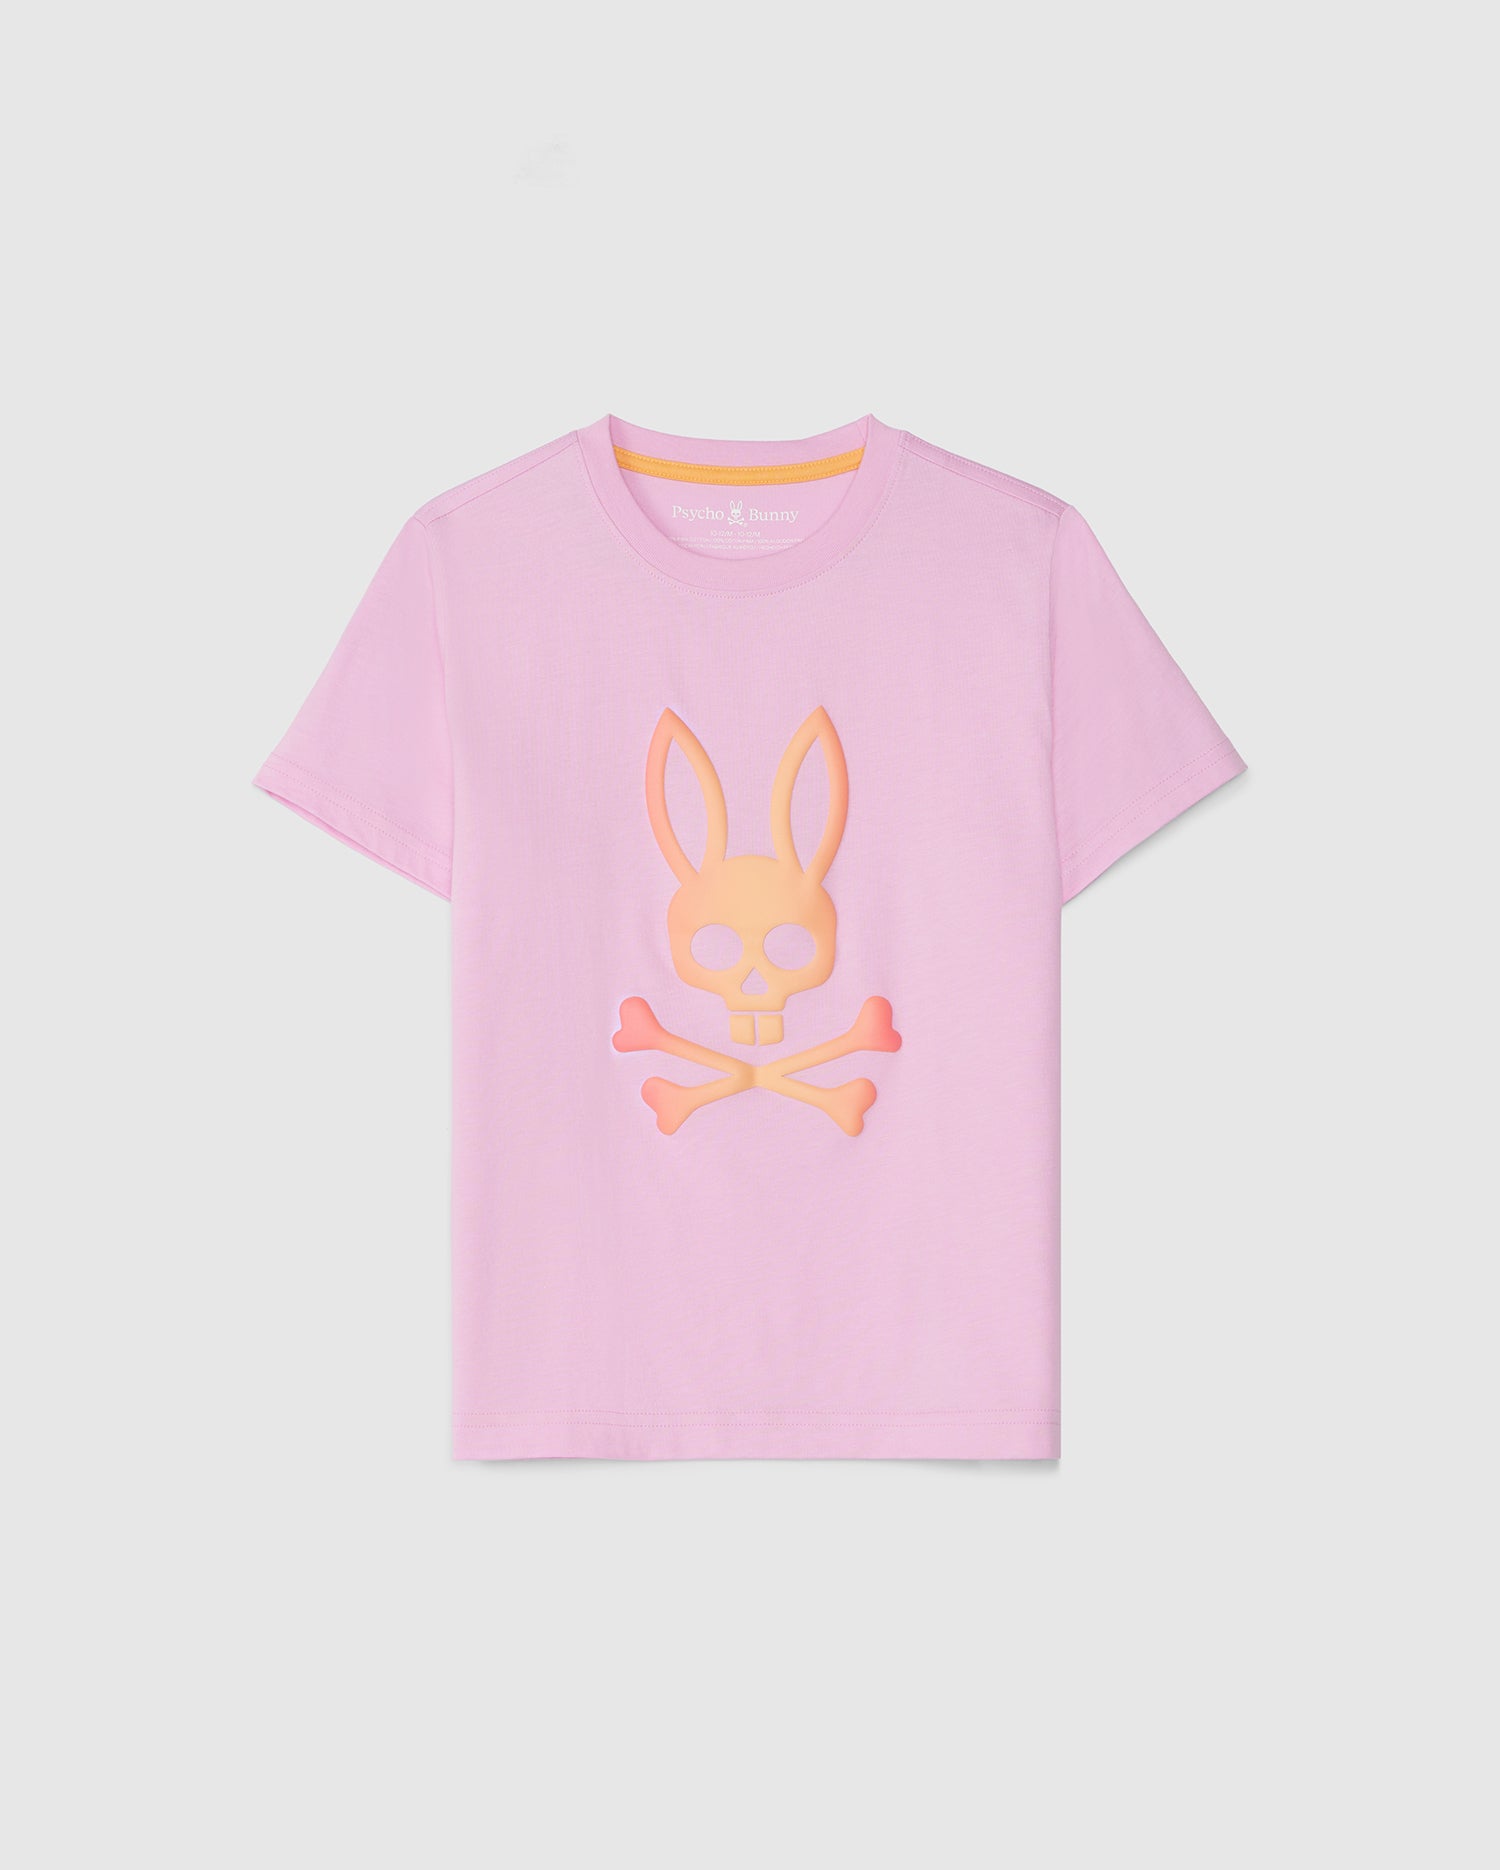 Discover this adorable pastel pink KIDS NORWOOD GRAPHIC TEE - B0U311B2TS by Psycho Bunny made from ultra-soft Peruvian Pima cotton, featuring an HD-printed bunny head above crossbones in a yellow and pink gradient. The playful design is perfectly centered on the front, displayed crisply against a plain white background.